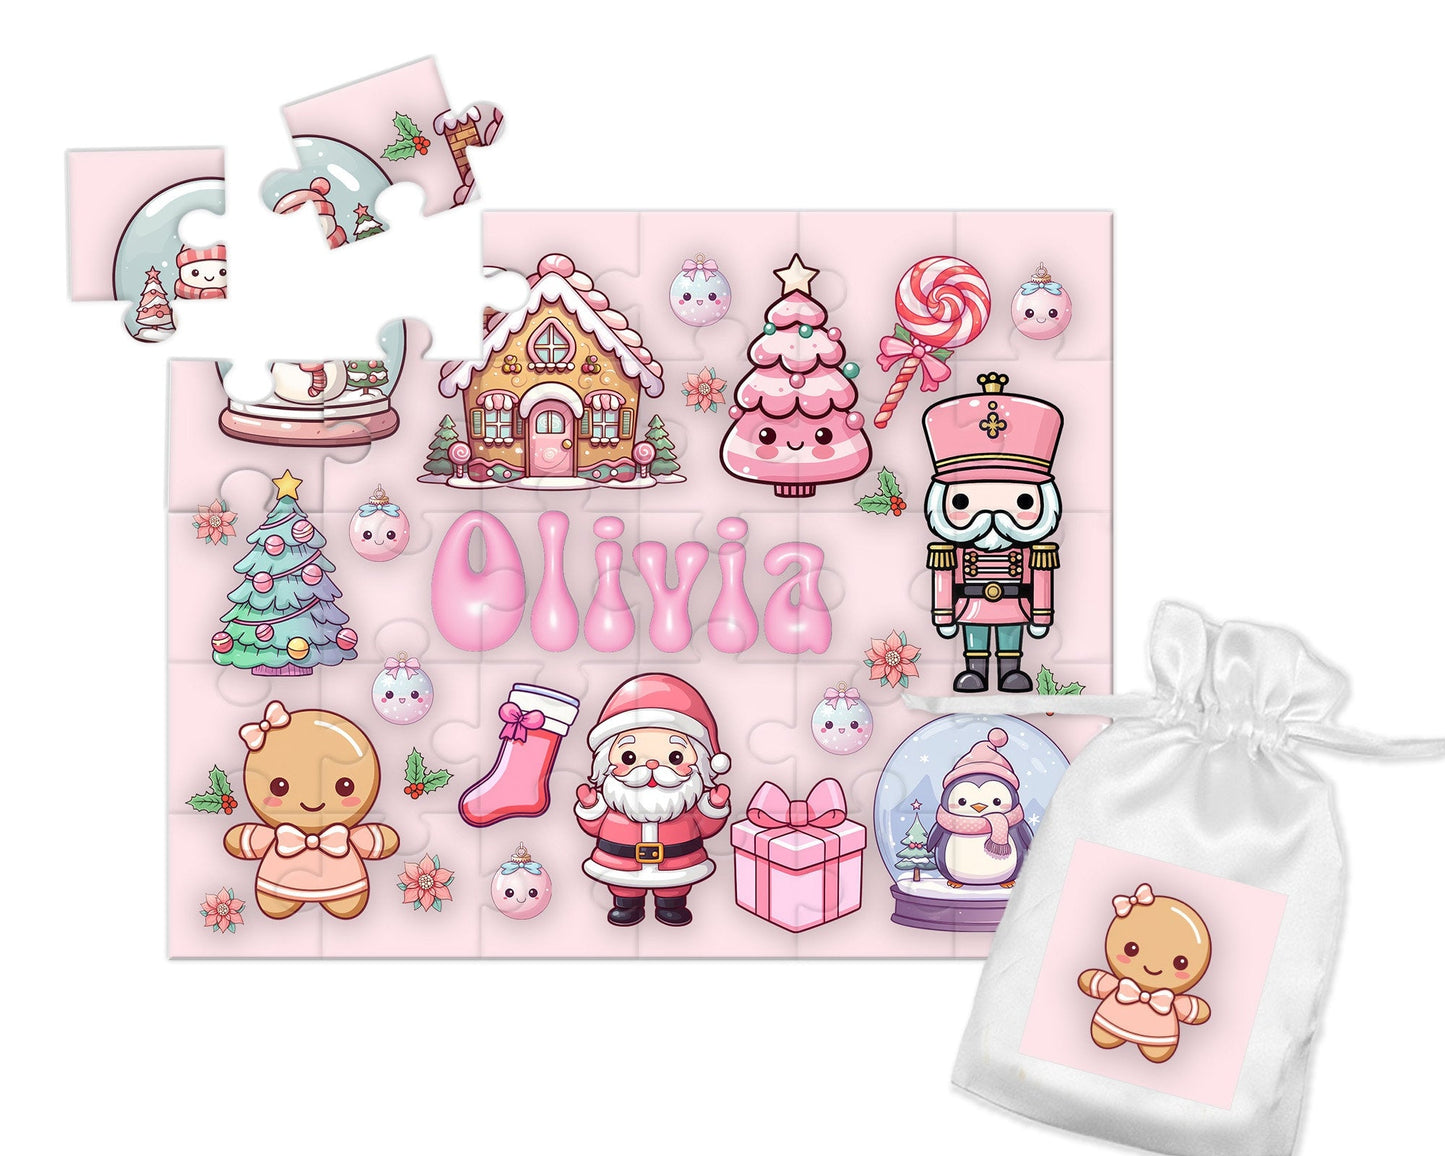 Girls Christmas Puzzle Stocking Stuffer Personalized Name Puzzle - Squishy Cheeks